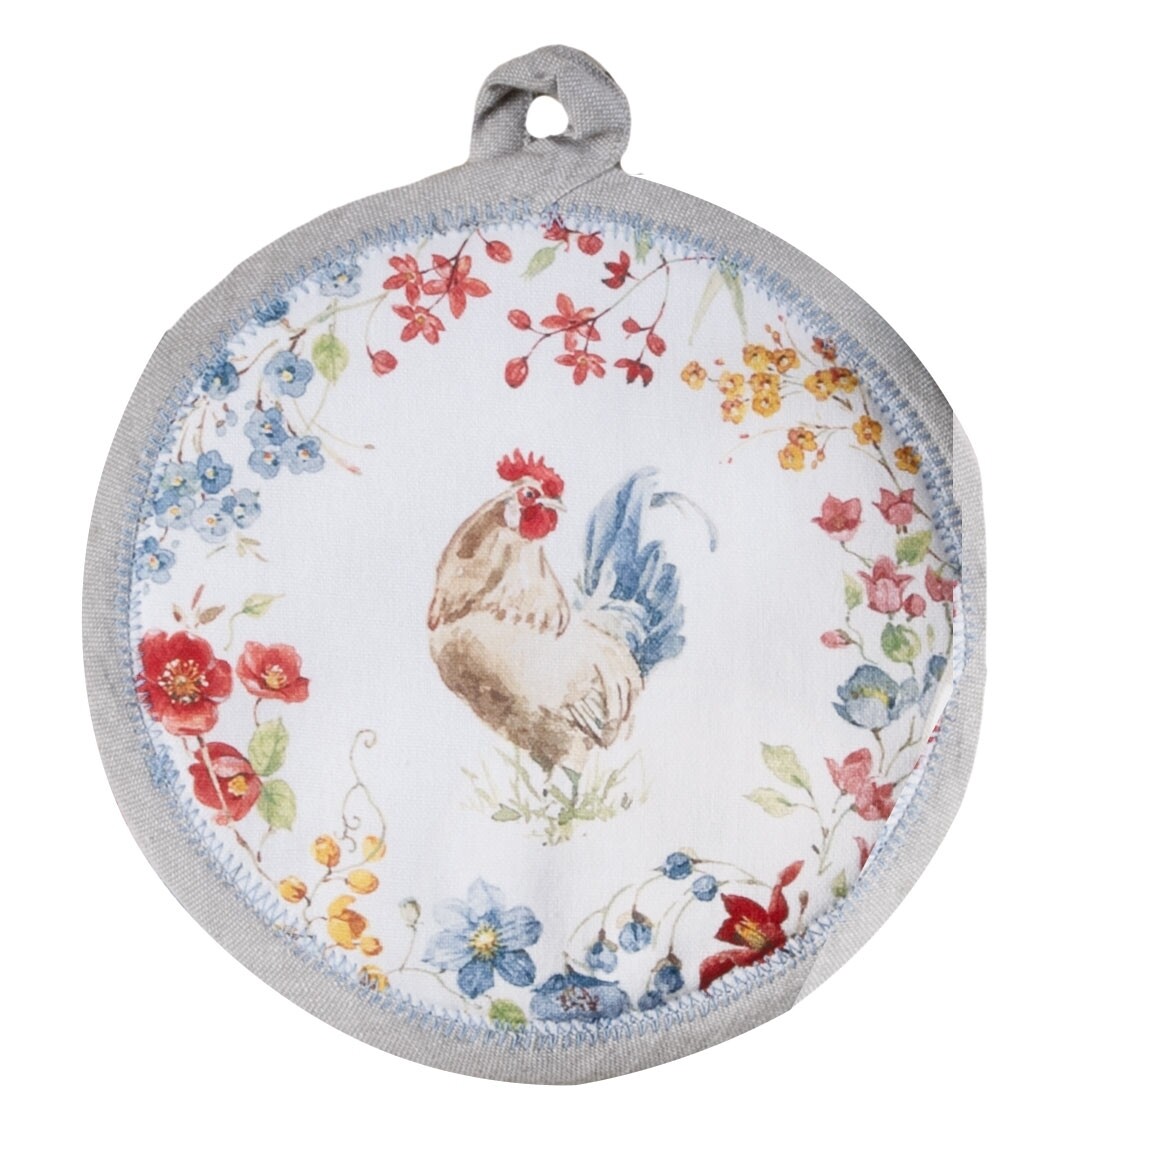 Kay Dee Designs Potholder | Countryside Rooster